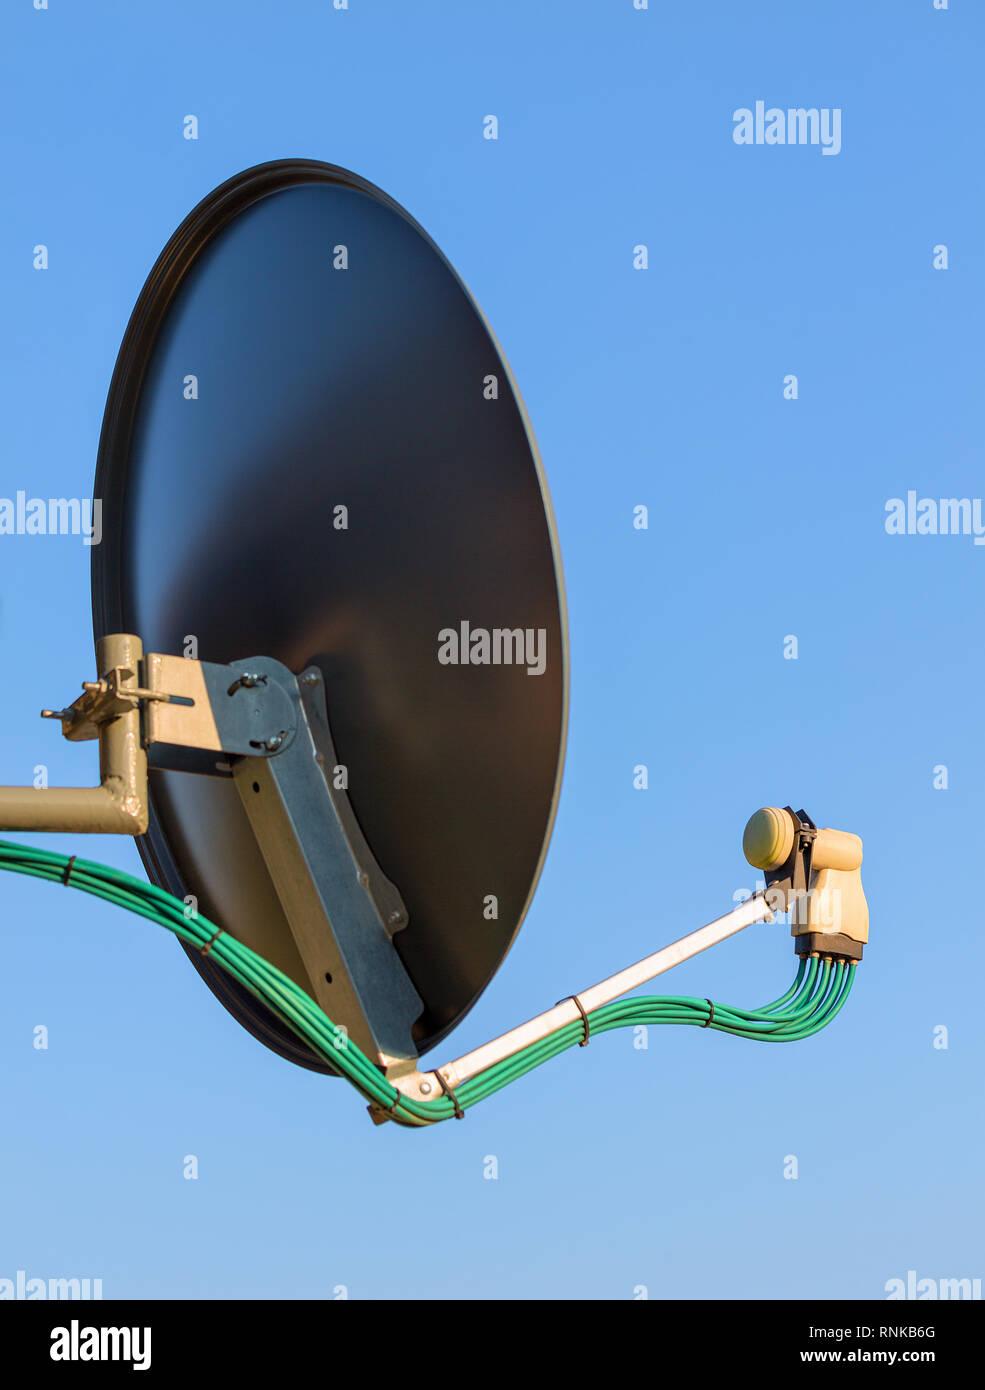 Residential TV receiver satellite dish with low-noise block downconverter (LNB). Satellite dish antenna with octo monoblock converter over blue sky. Stock Photo